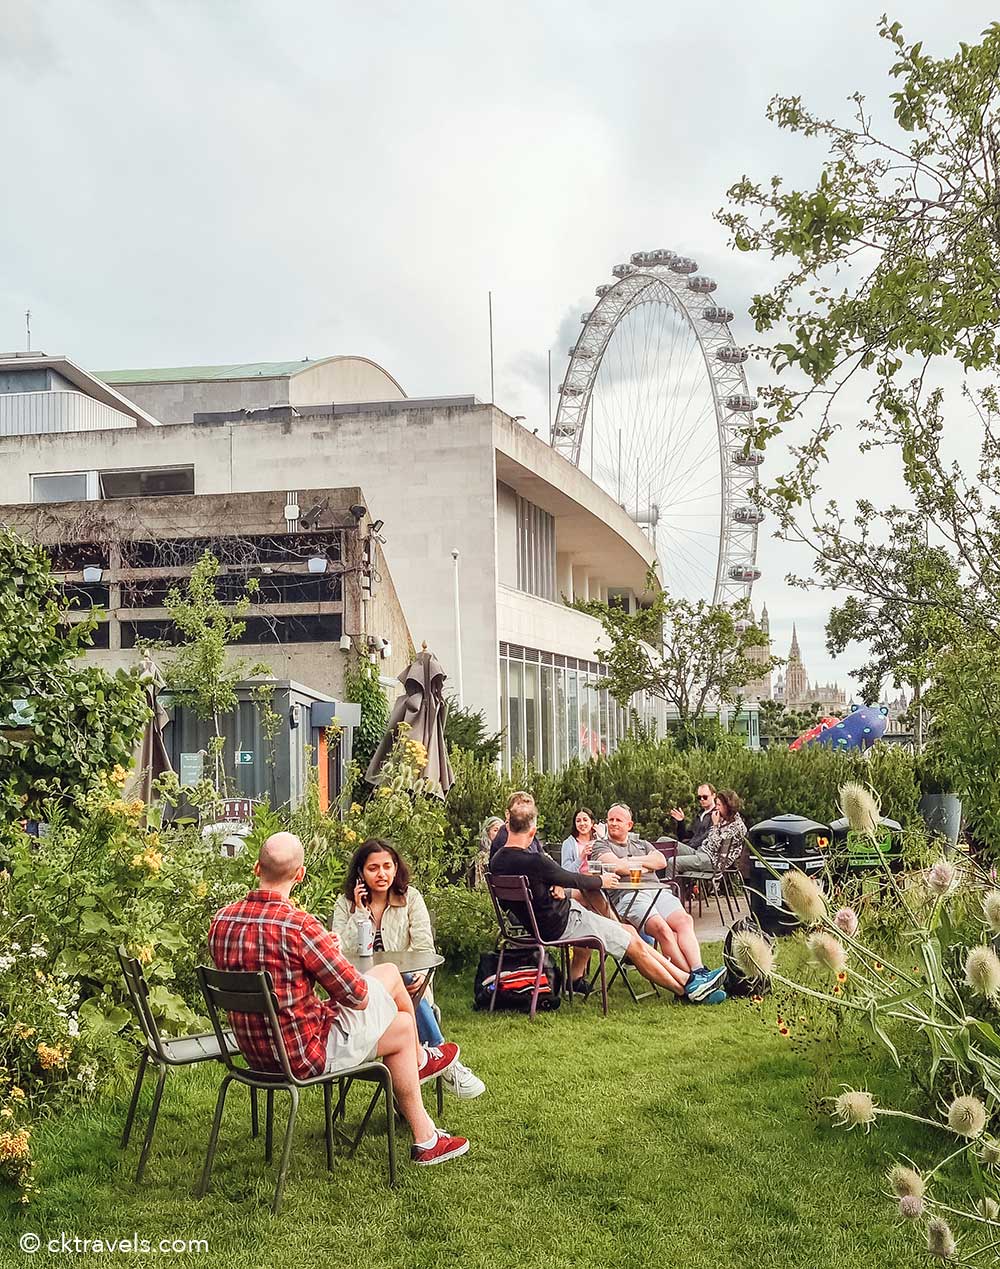 Queen Elizabeth Hall Roof Garden and Cafe South Bank London